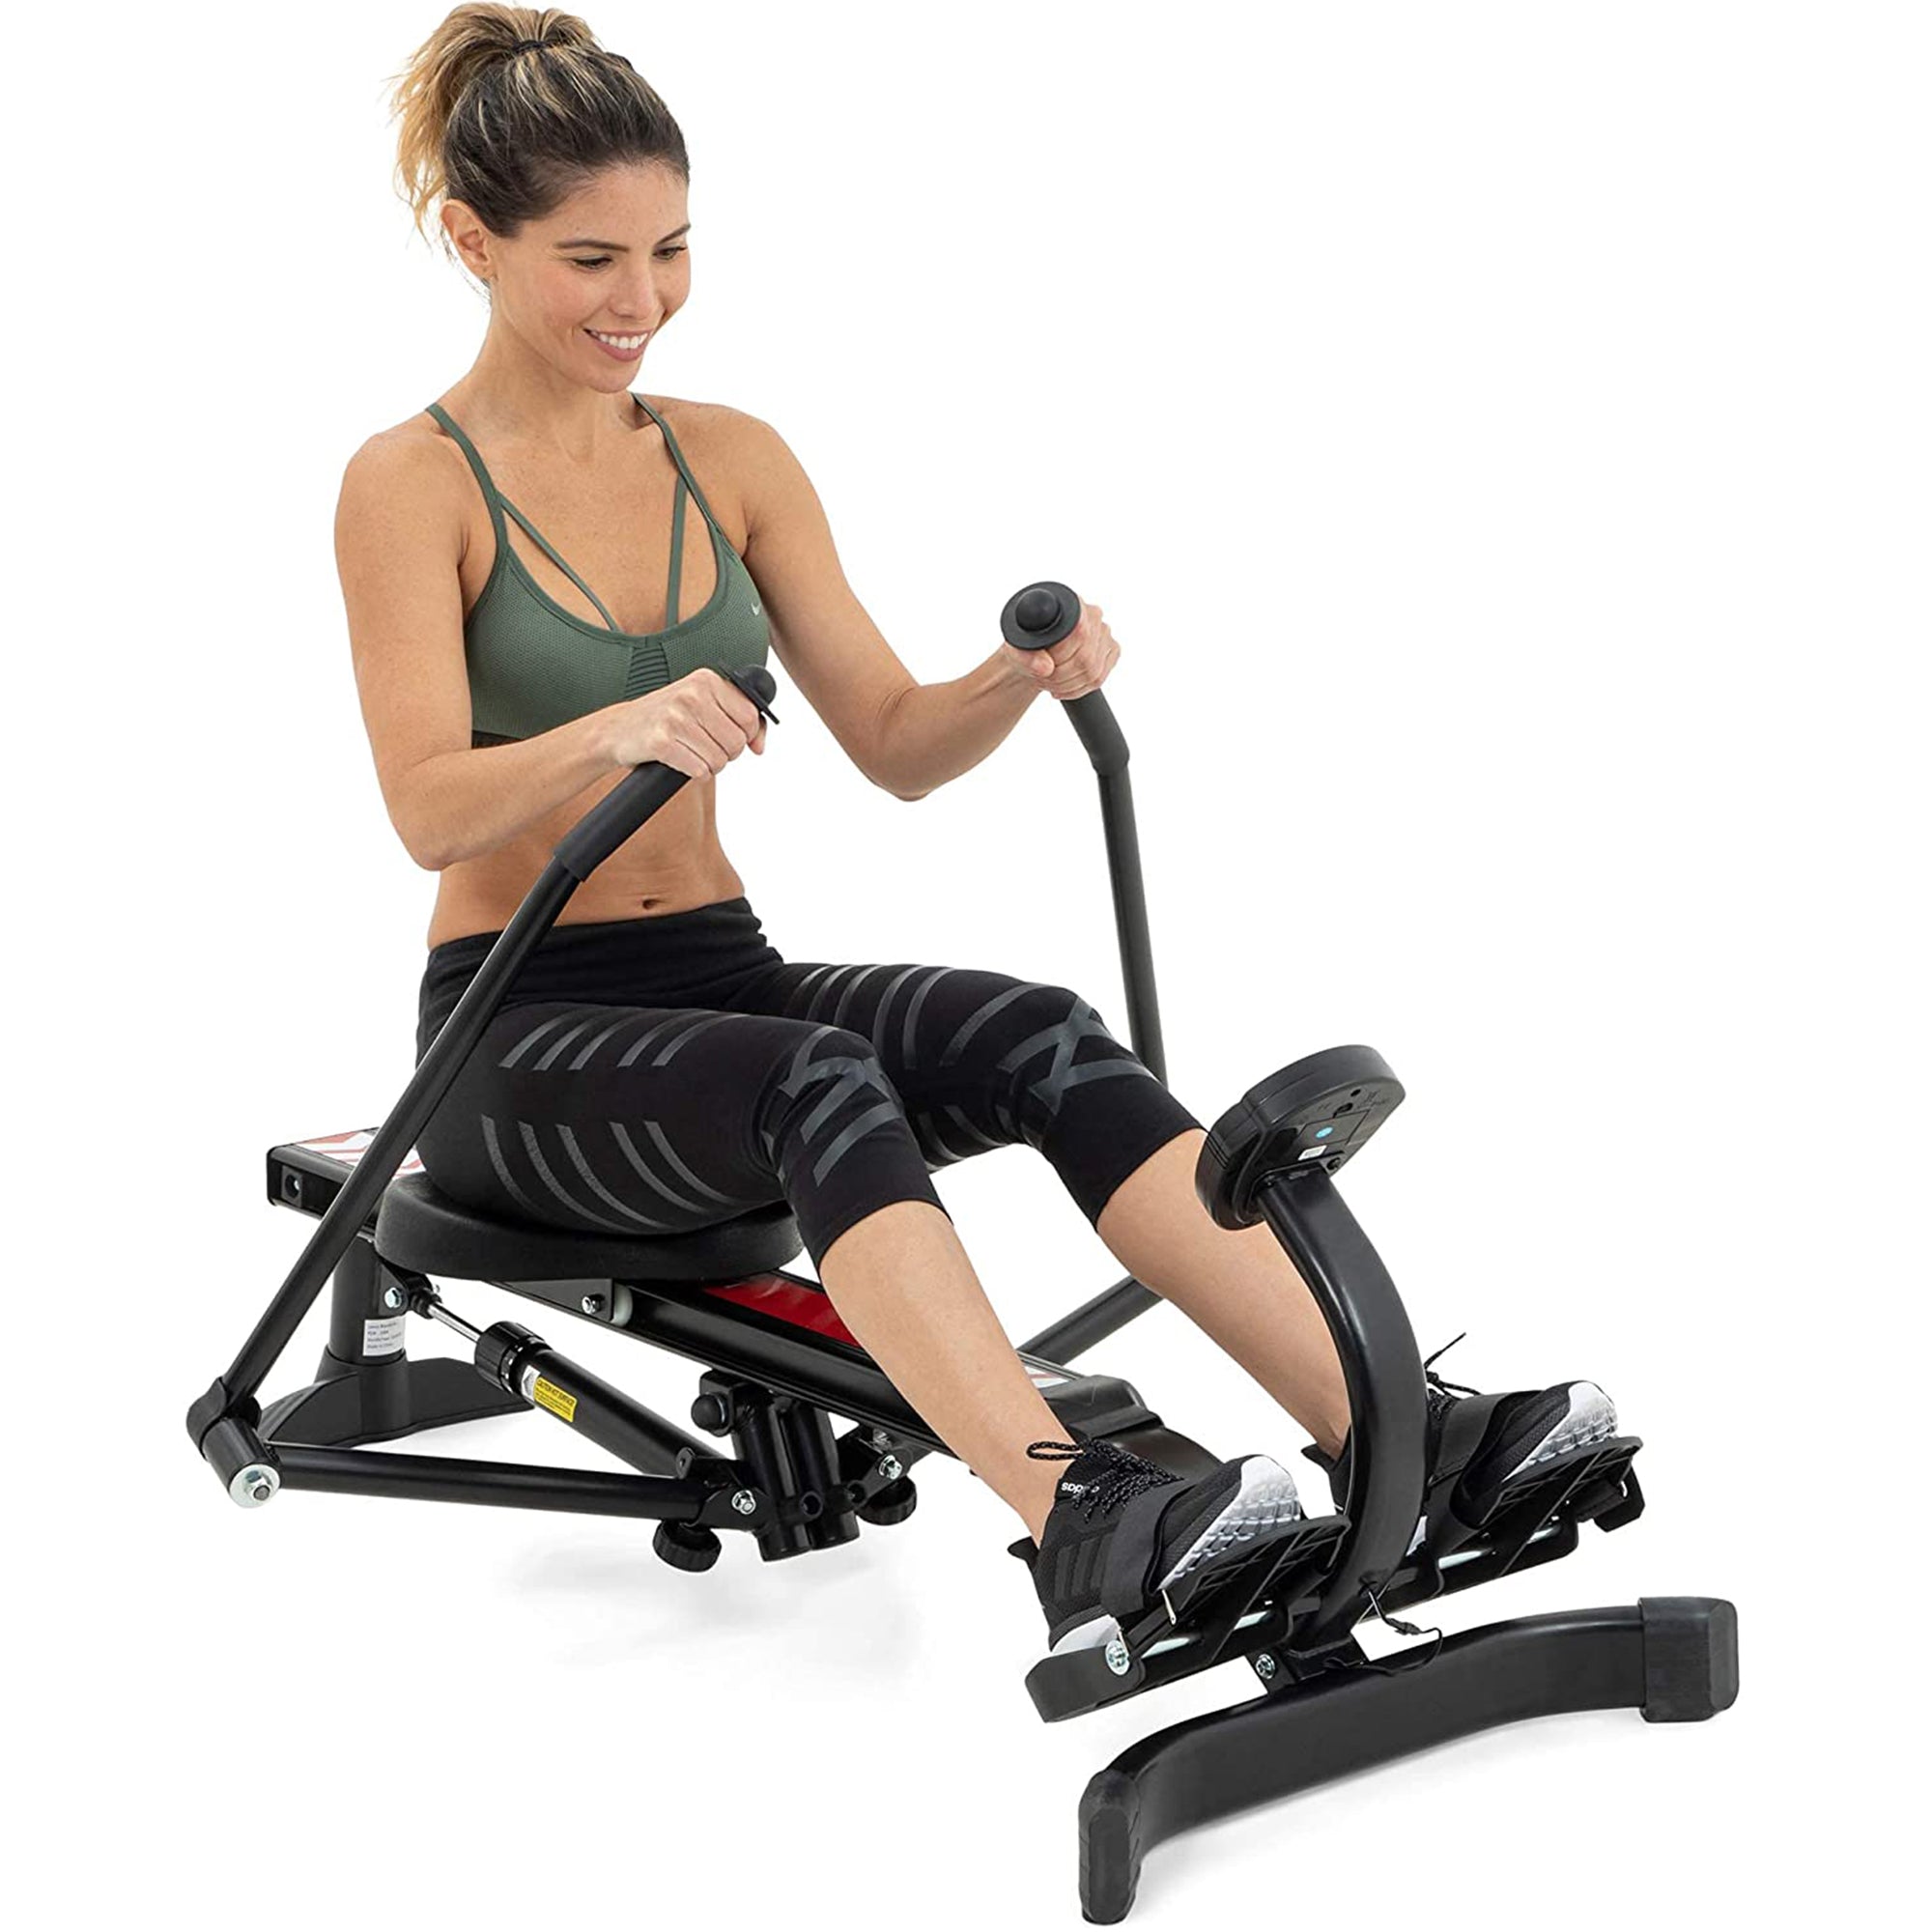 Rowing Machine for Exercise Equipment W/ Adjustable Resistance